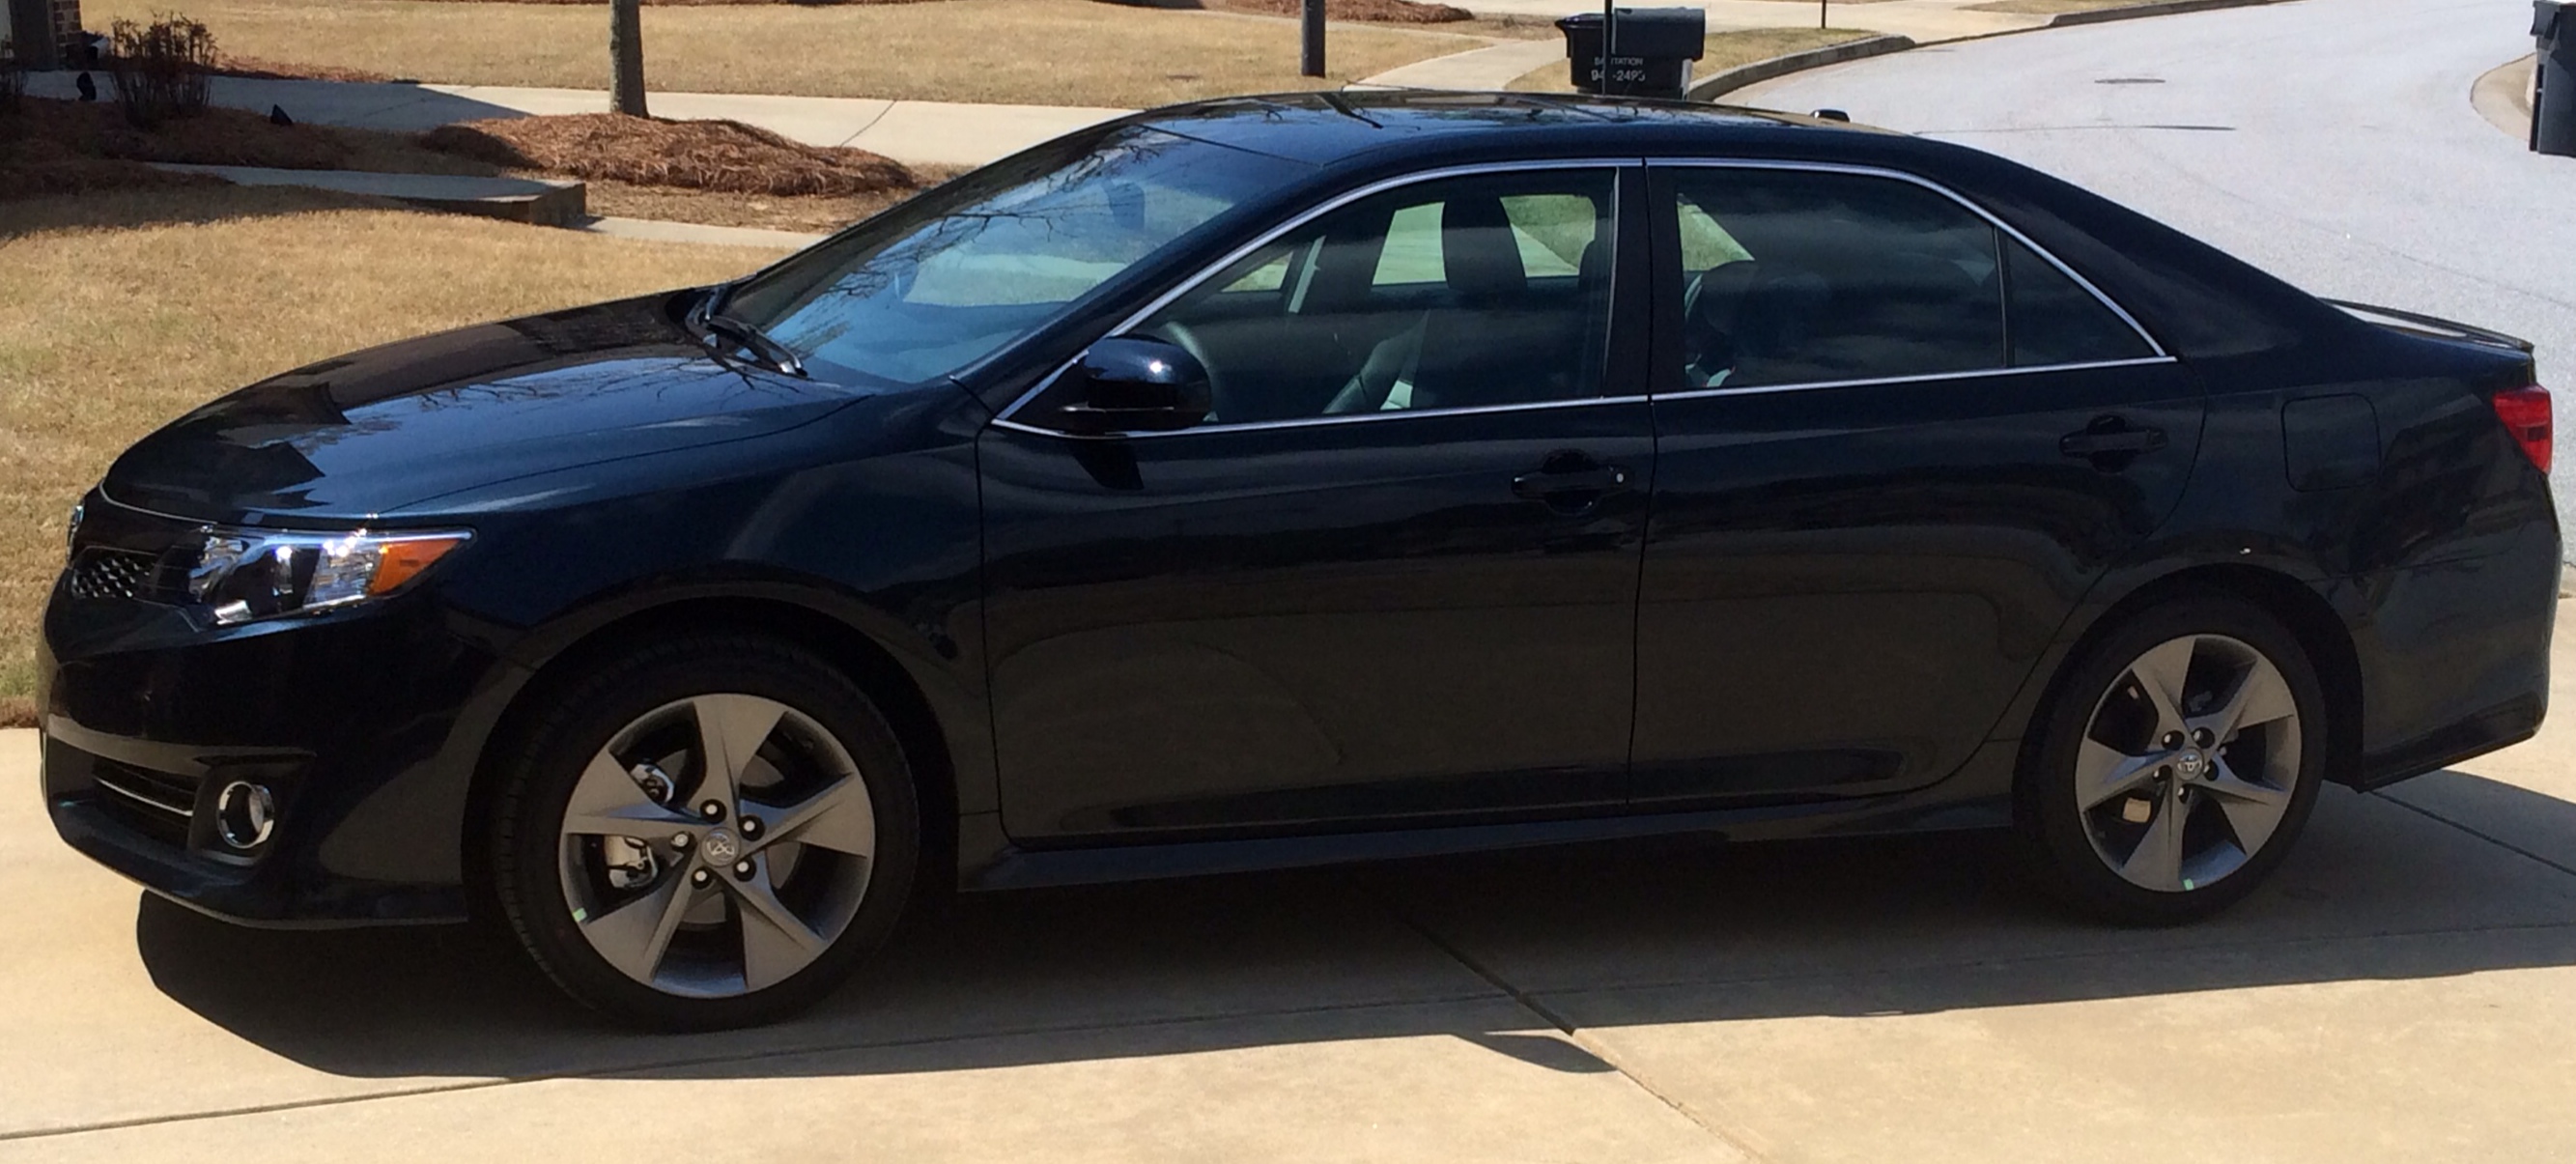 2014 Camry SE sideview